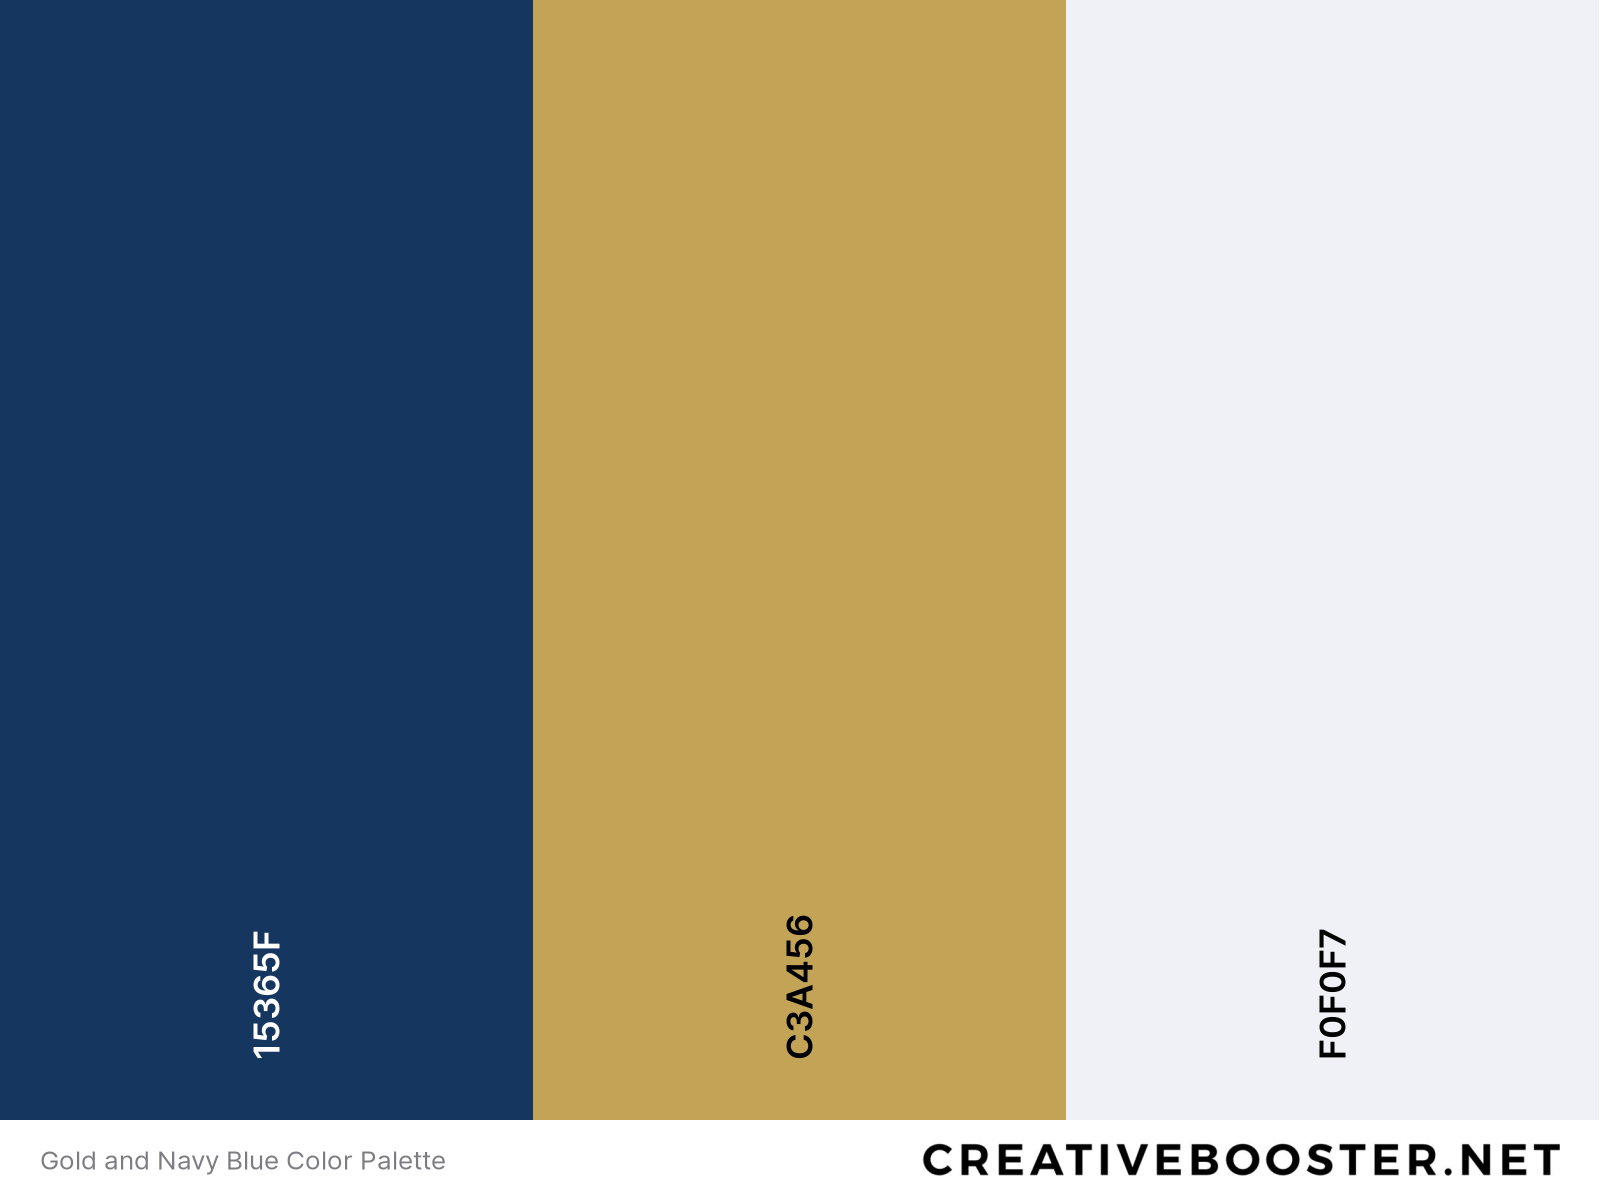 Gold and Navy Blue Color Palette